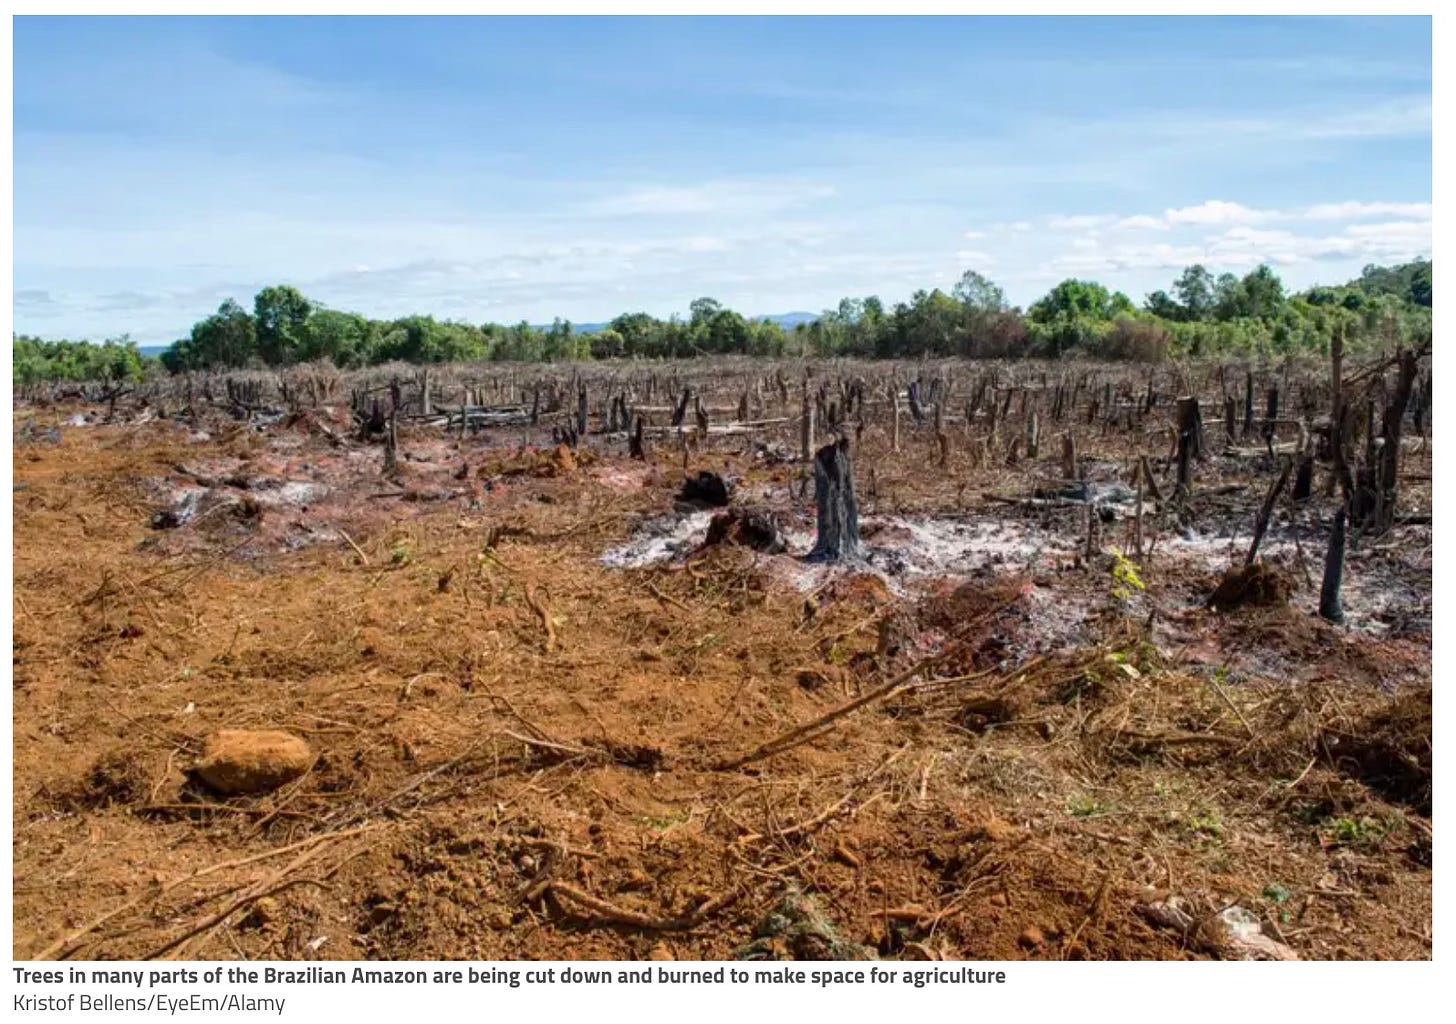 Trees in many parts of the Brazilian Amazon are being cut down and burned to make space for agriculture  Kristof Bellens/EyeEm/Alamy